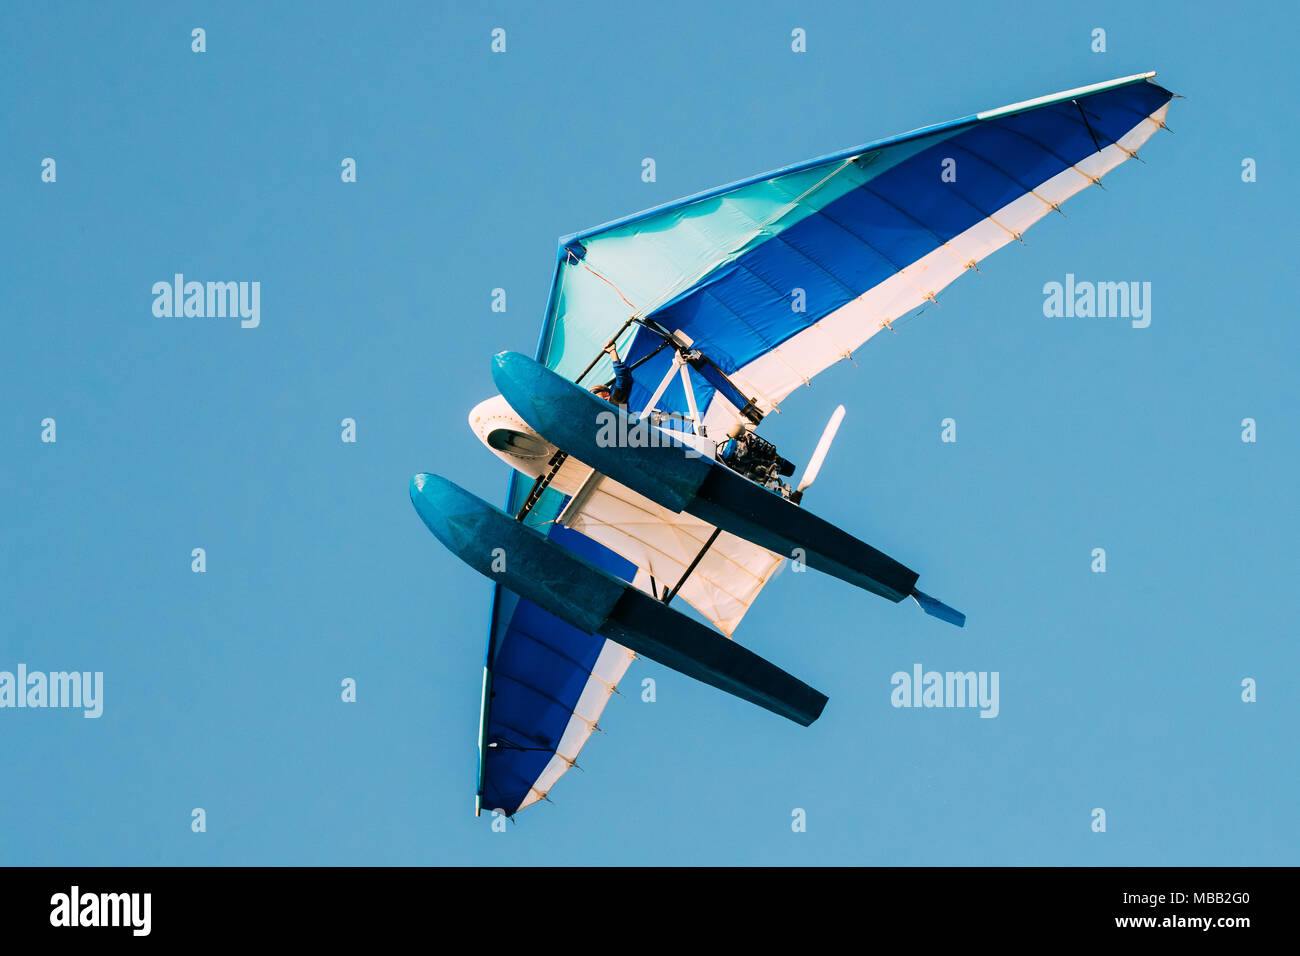 Motorized Hang Glider Flying On Blue Clear Sunny Sky Background. Stock Photo